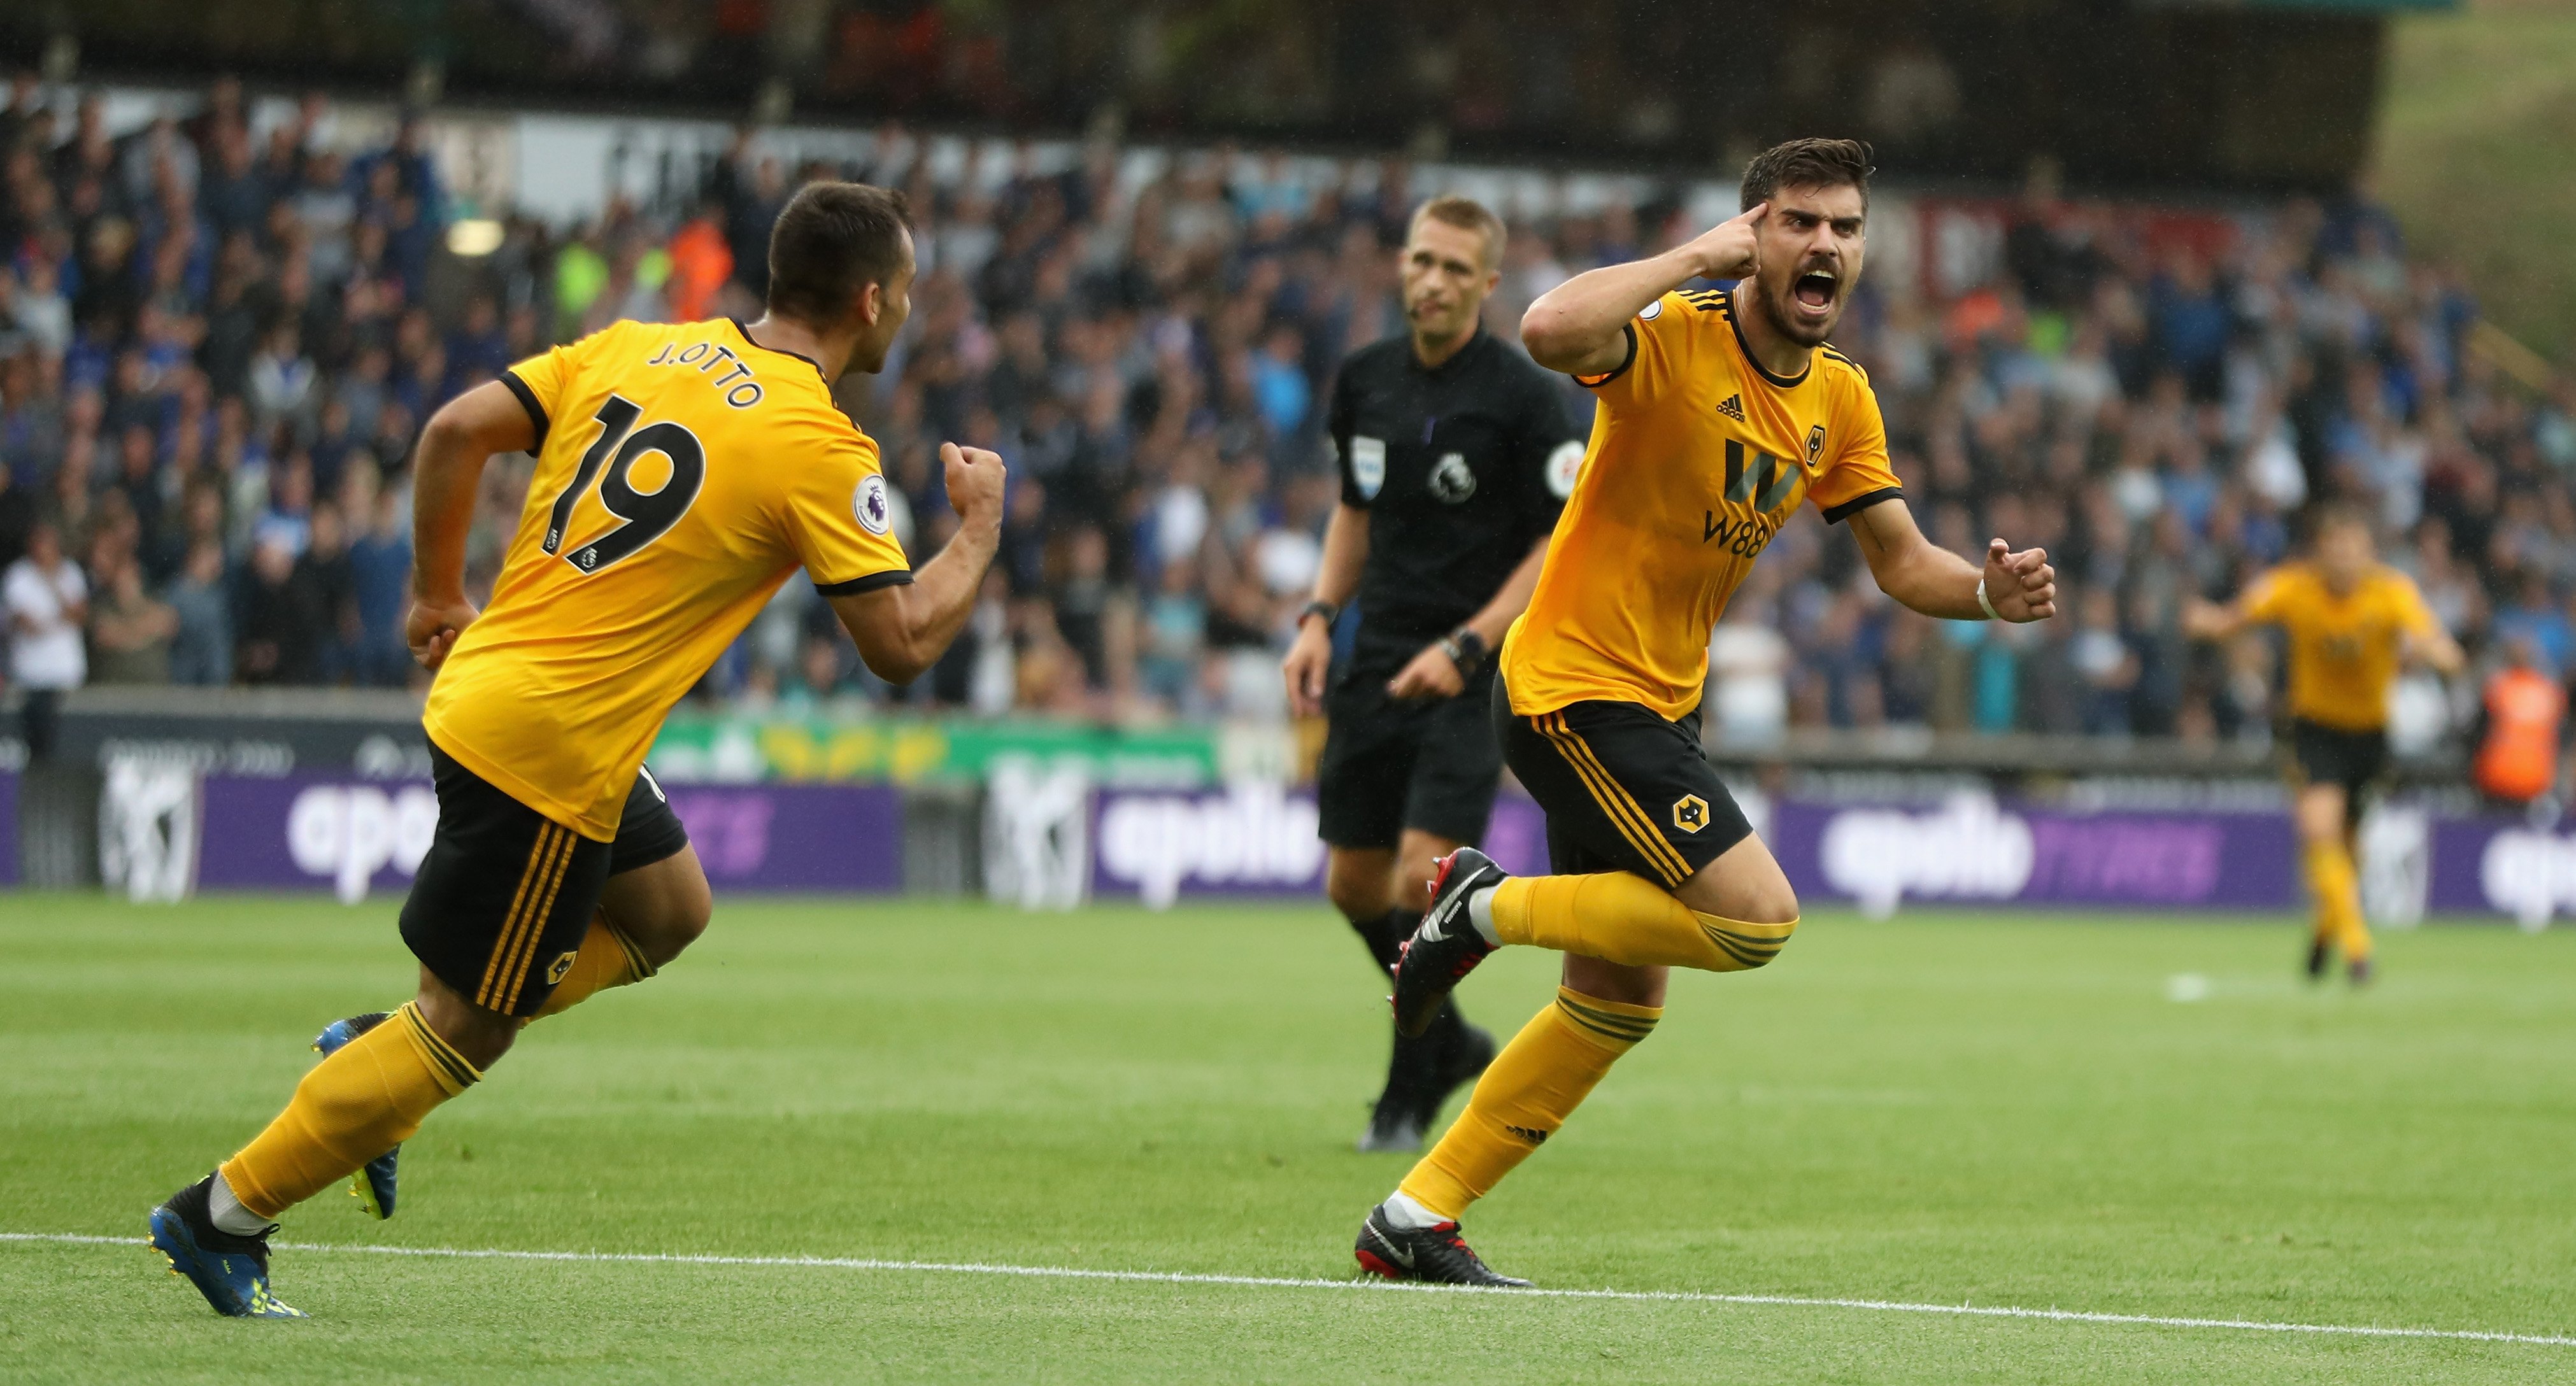 Ruben Neves could cost more than Paul Pogba if he leaves Wolves